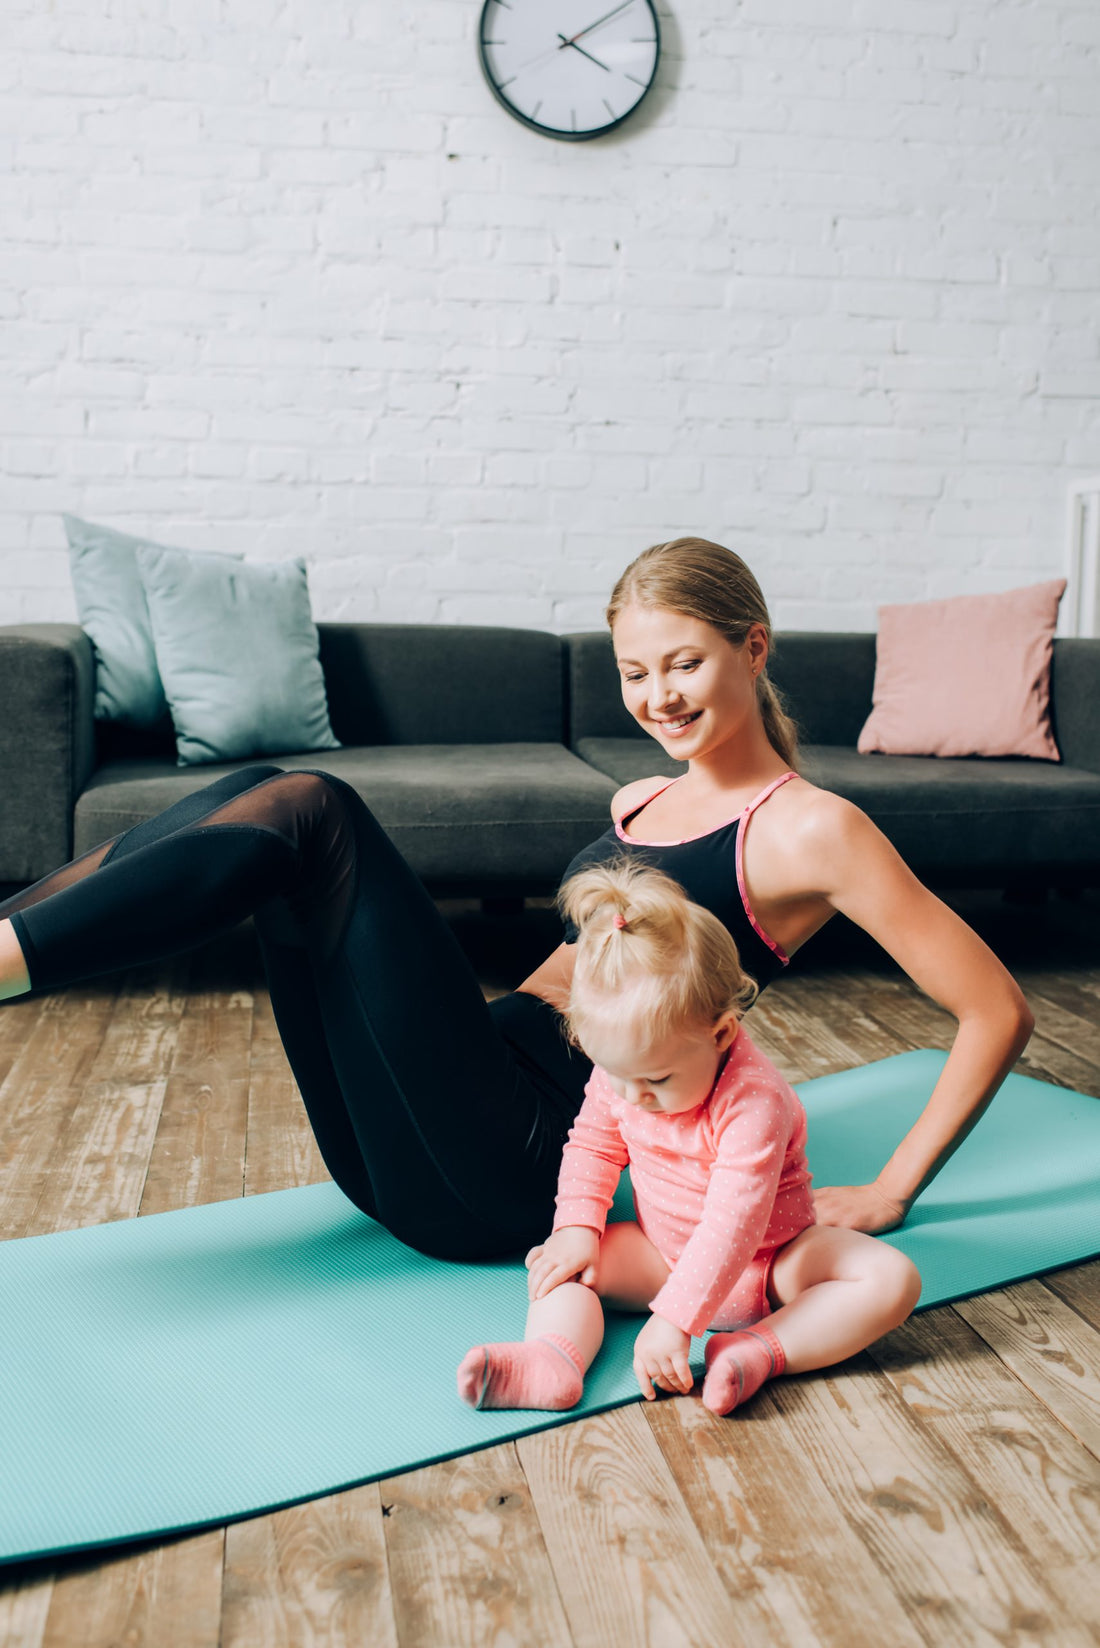 Mommy Tummy Explained: Overhang vs The Pooch